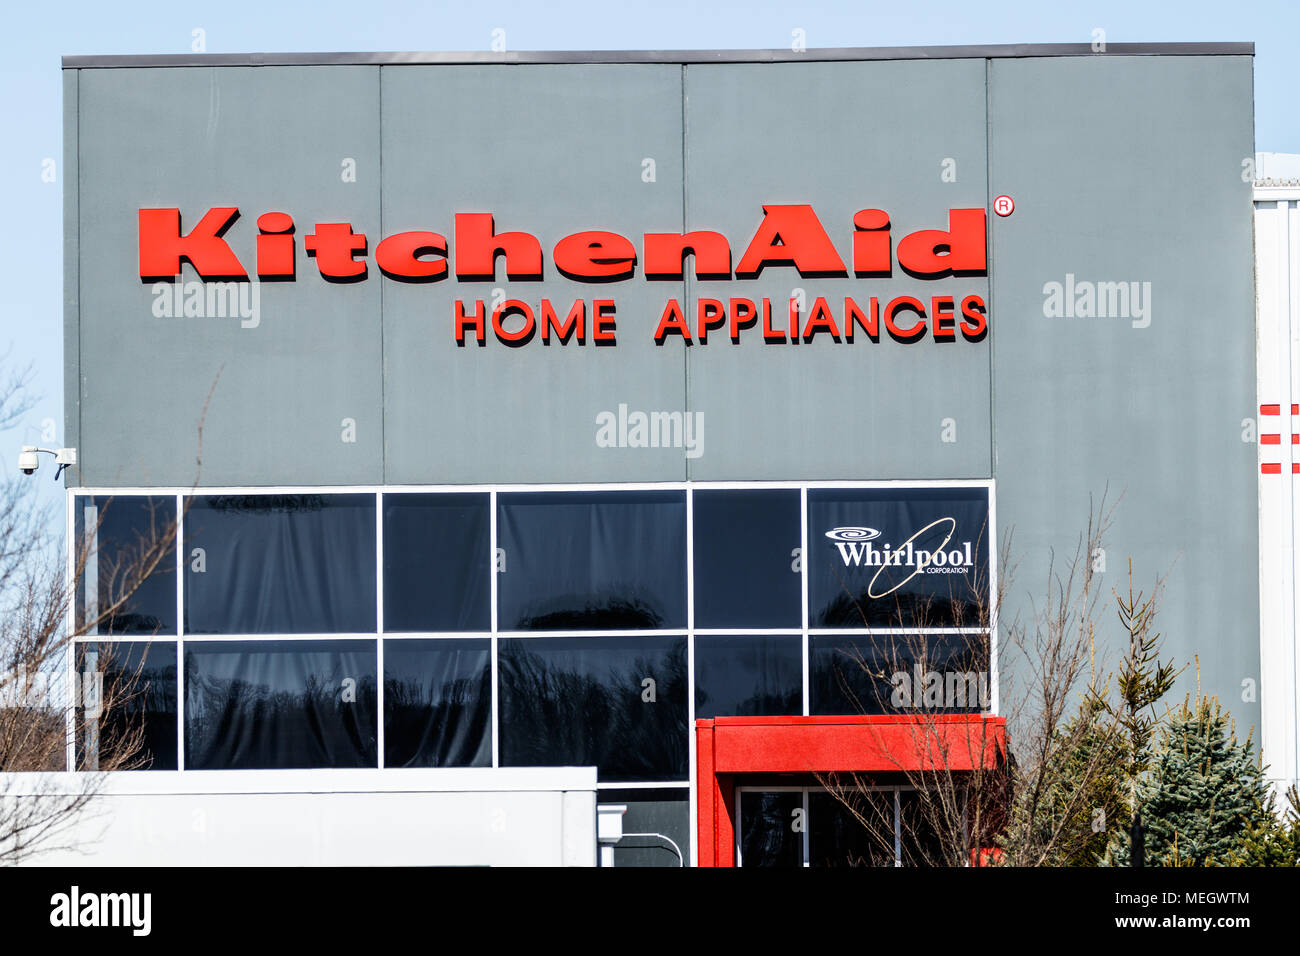 https://c8.alamy.com/comp/MEGWTM/greenville-circa-april-2018-kitchenaid-greenville-operations-factory-where-whirlpool-produces-kitchenaid-brand-mixers-hand-mixers-and-blenders-ii-MEGWTM.jpg